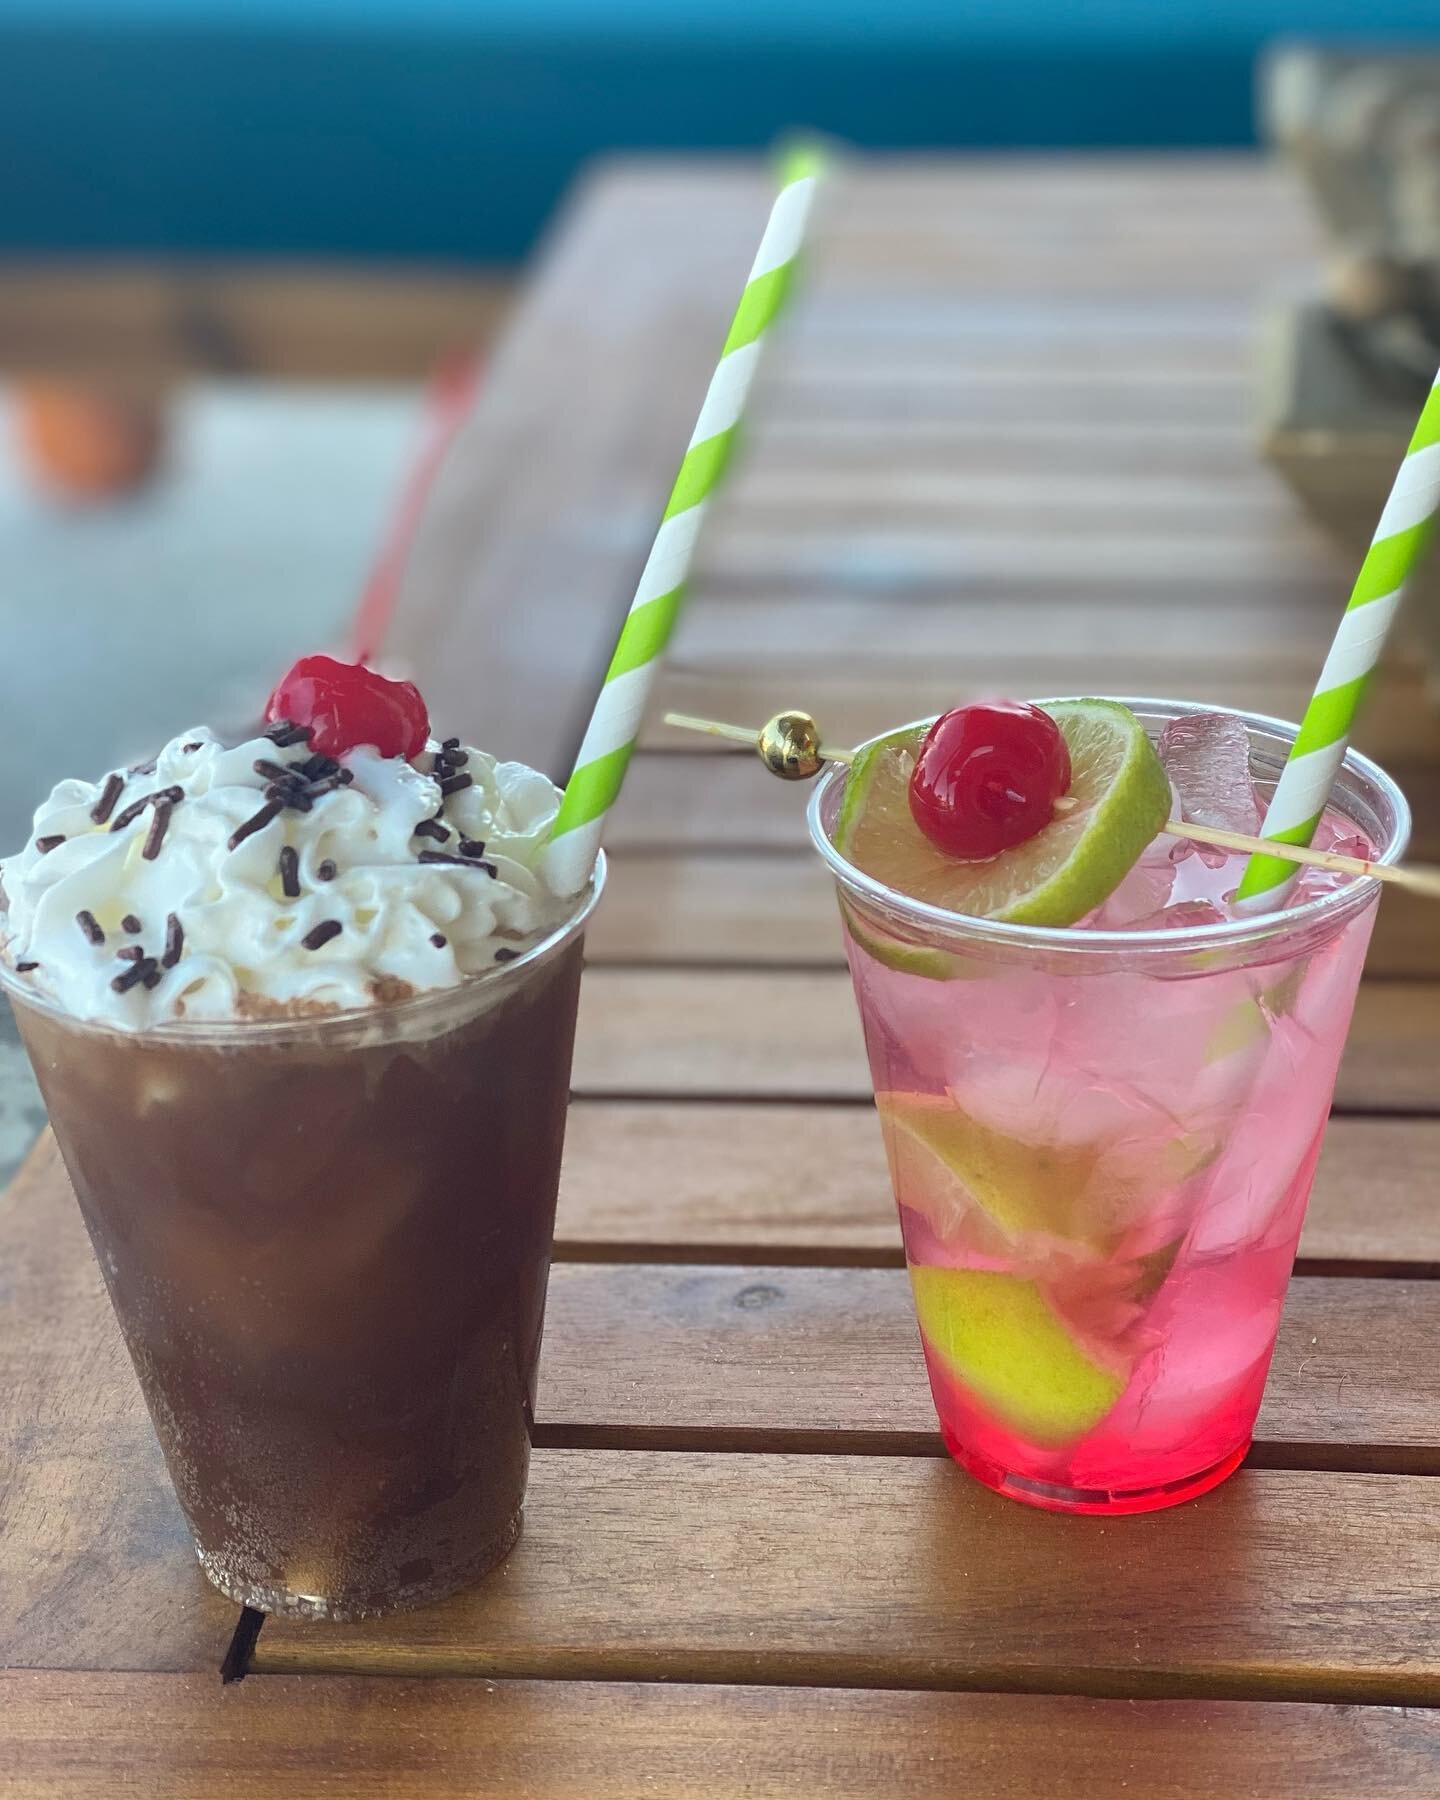 We really enjoyed serving these Mocktails at our Tasting for Korie and Jake&rsquo;s wedding next July.
The Groom&rsquo;s bar will serve soda shop style classics, (chocolate sodas, and cherry lime soda)
The Bride&rsquo;s bar will serve elevated versio